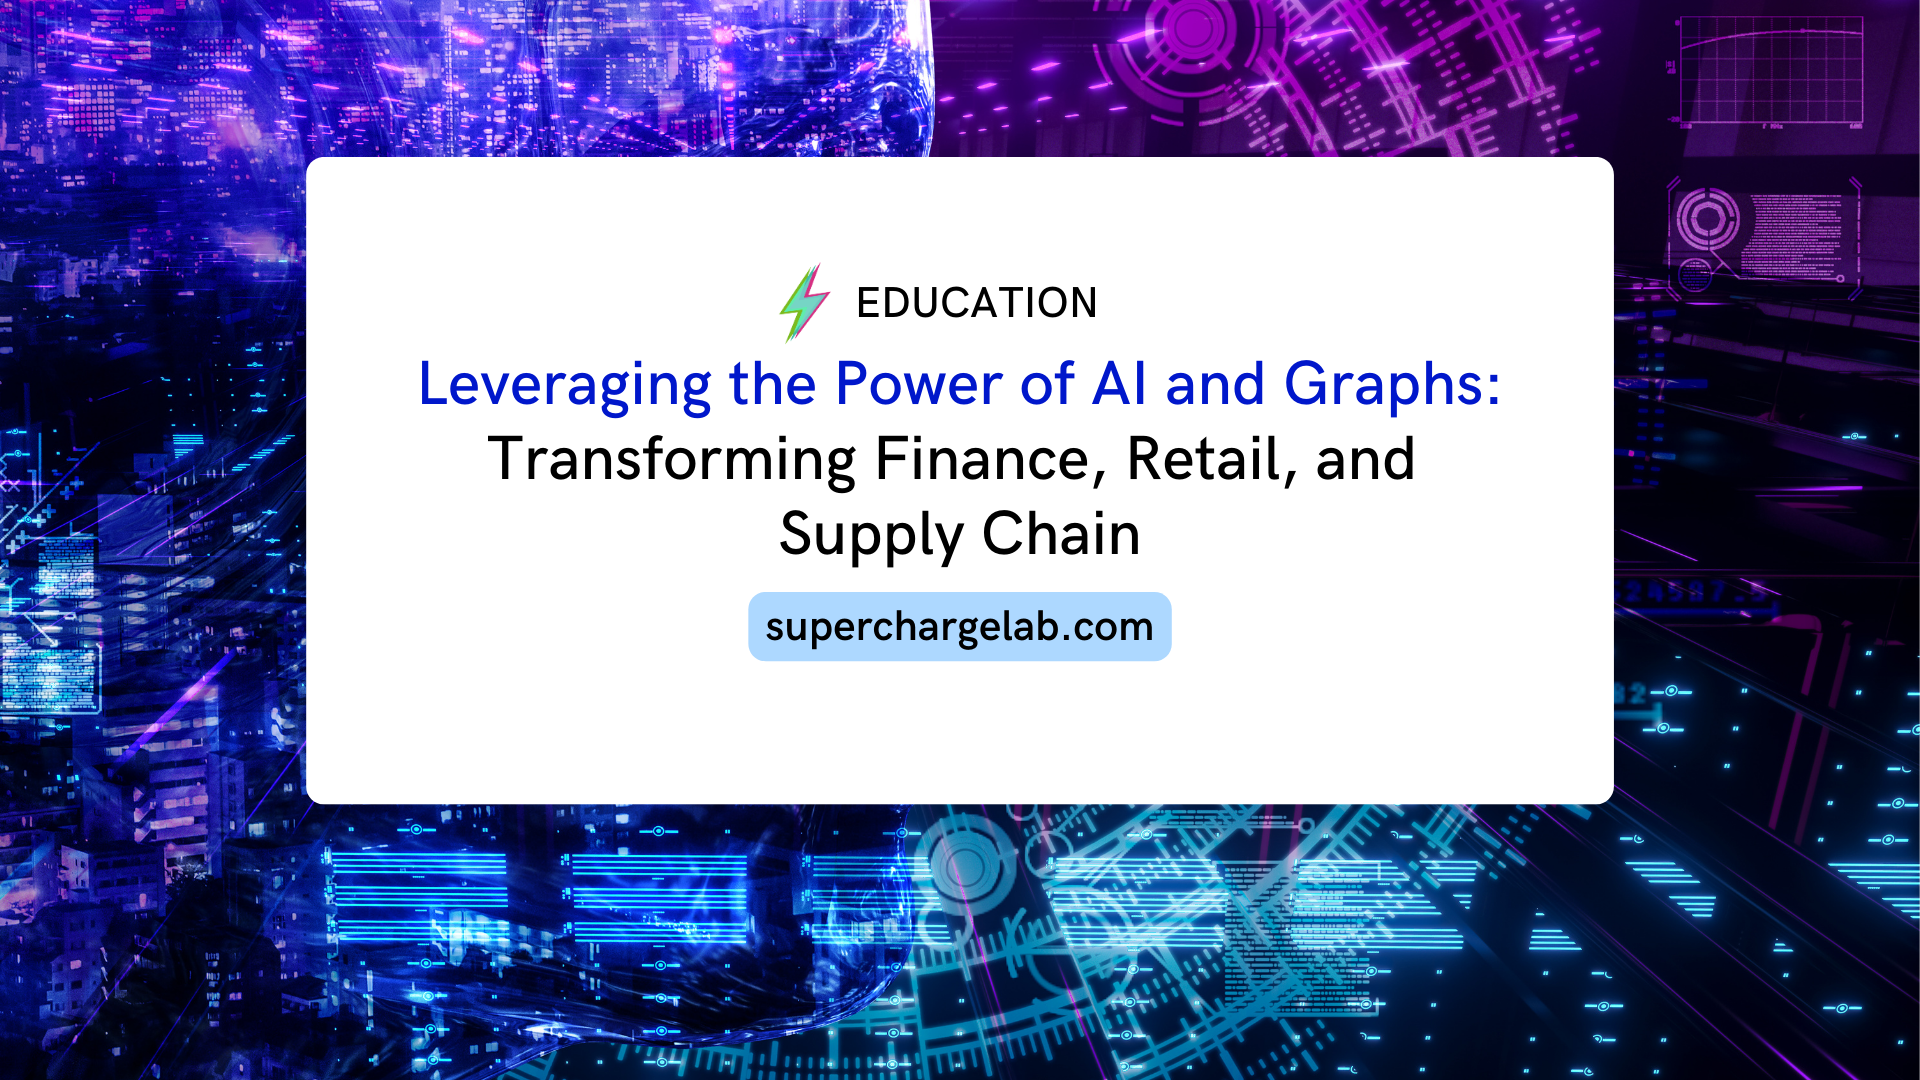 Leveraging the Power of AI and Graphs: Transforming Finance, Retail, and Supply Chain